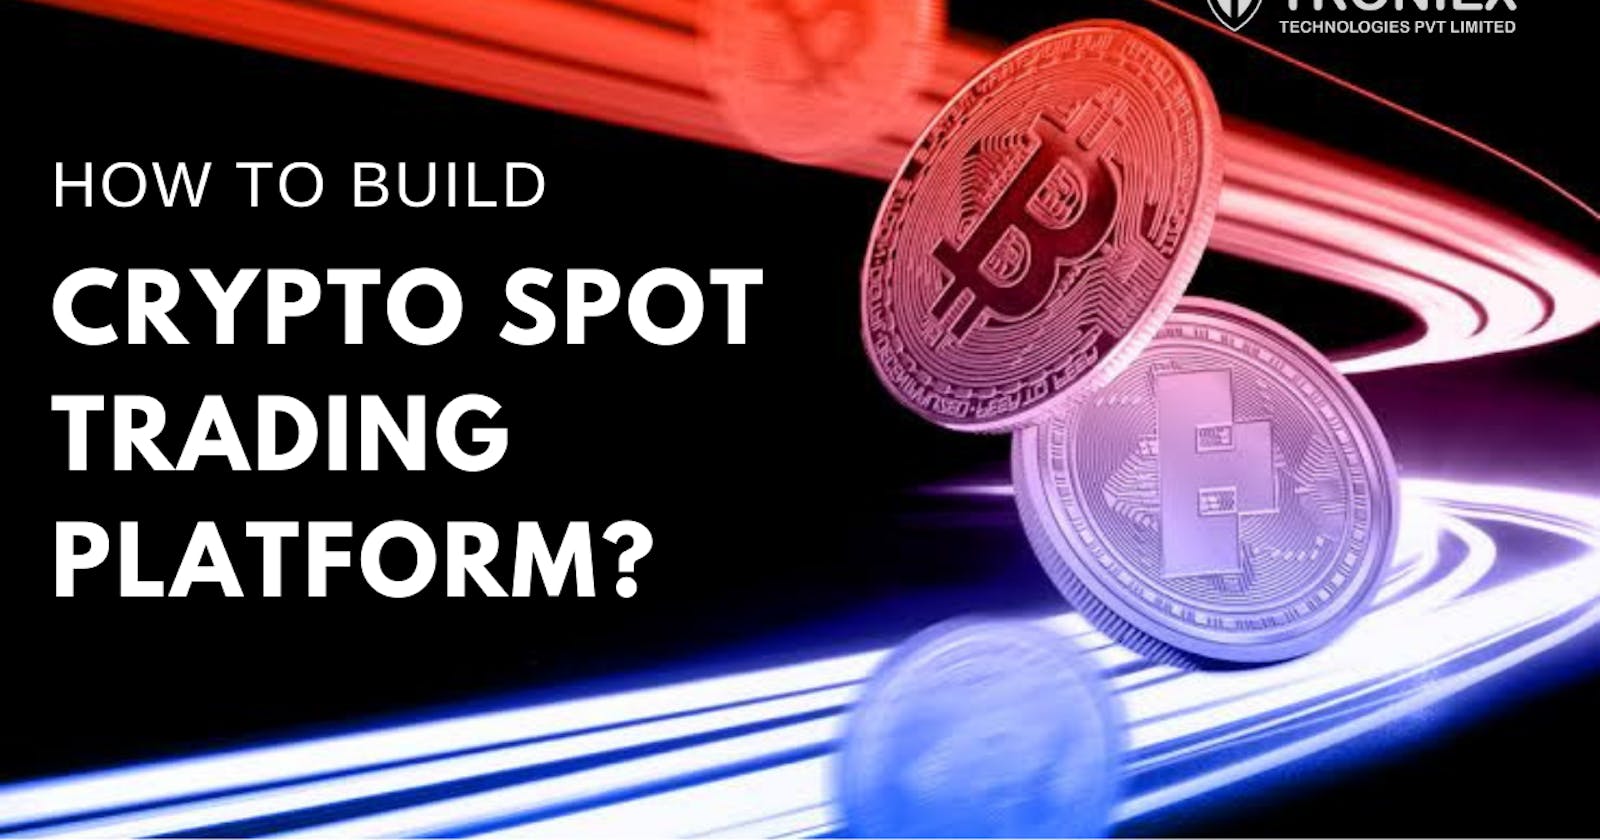 What is Crypto Spot trading platform?